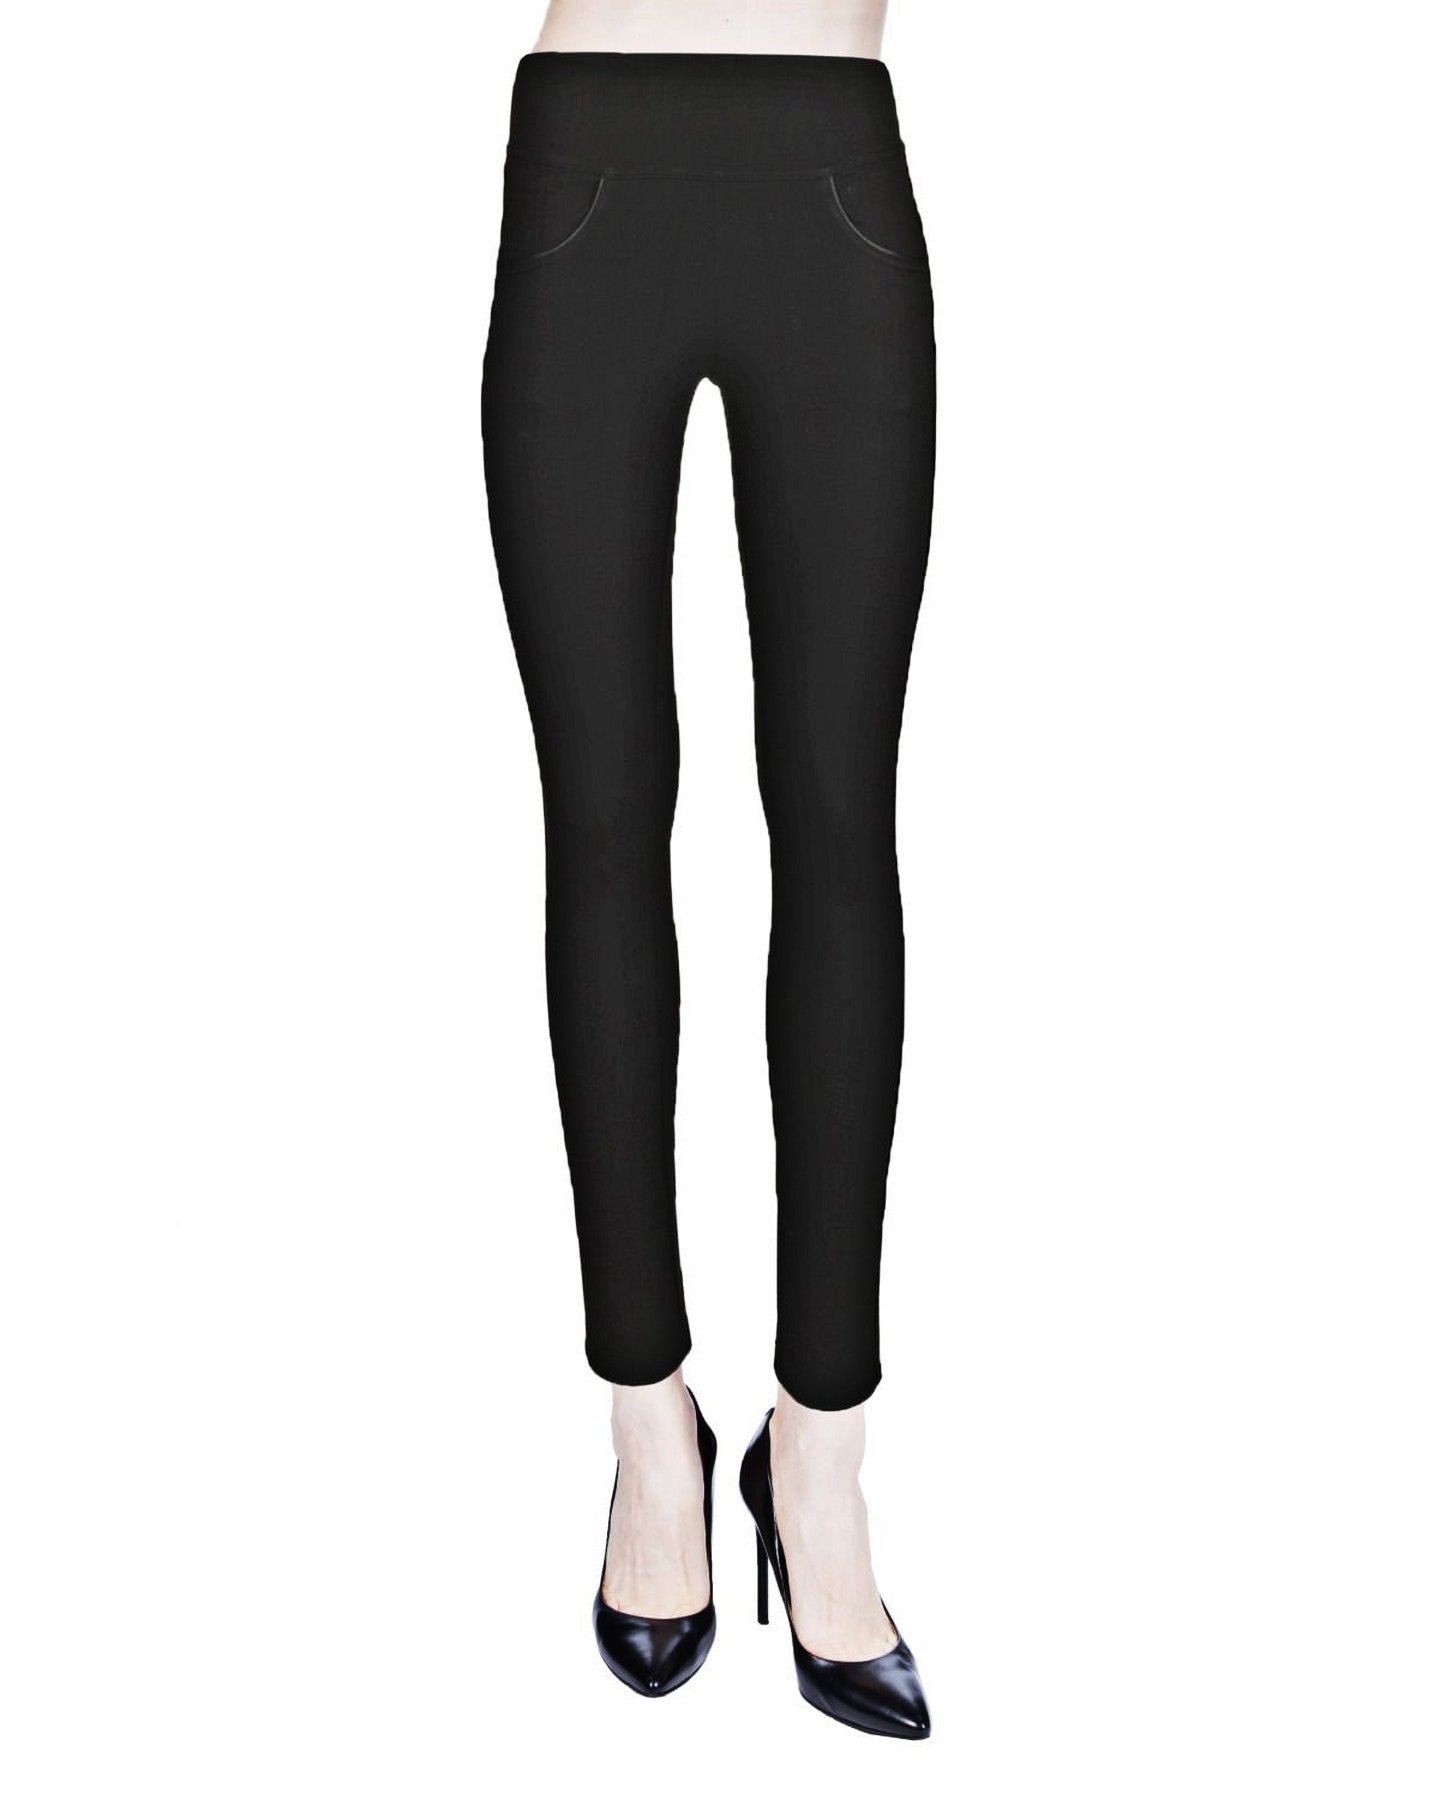 Best Deal for Meymia Lace Leggings for Women High Waisted Tummy